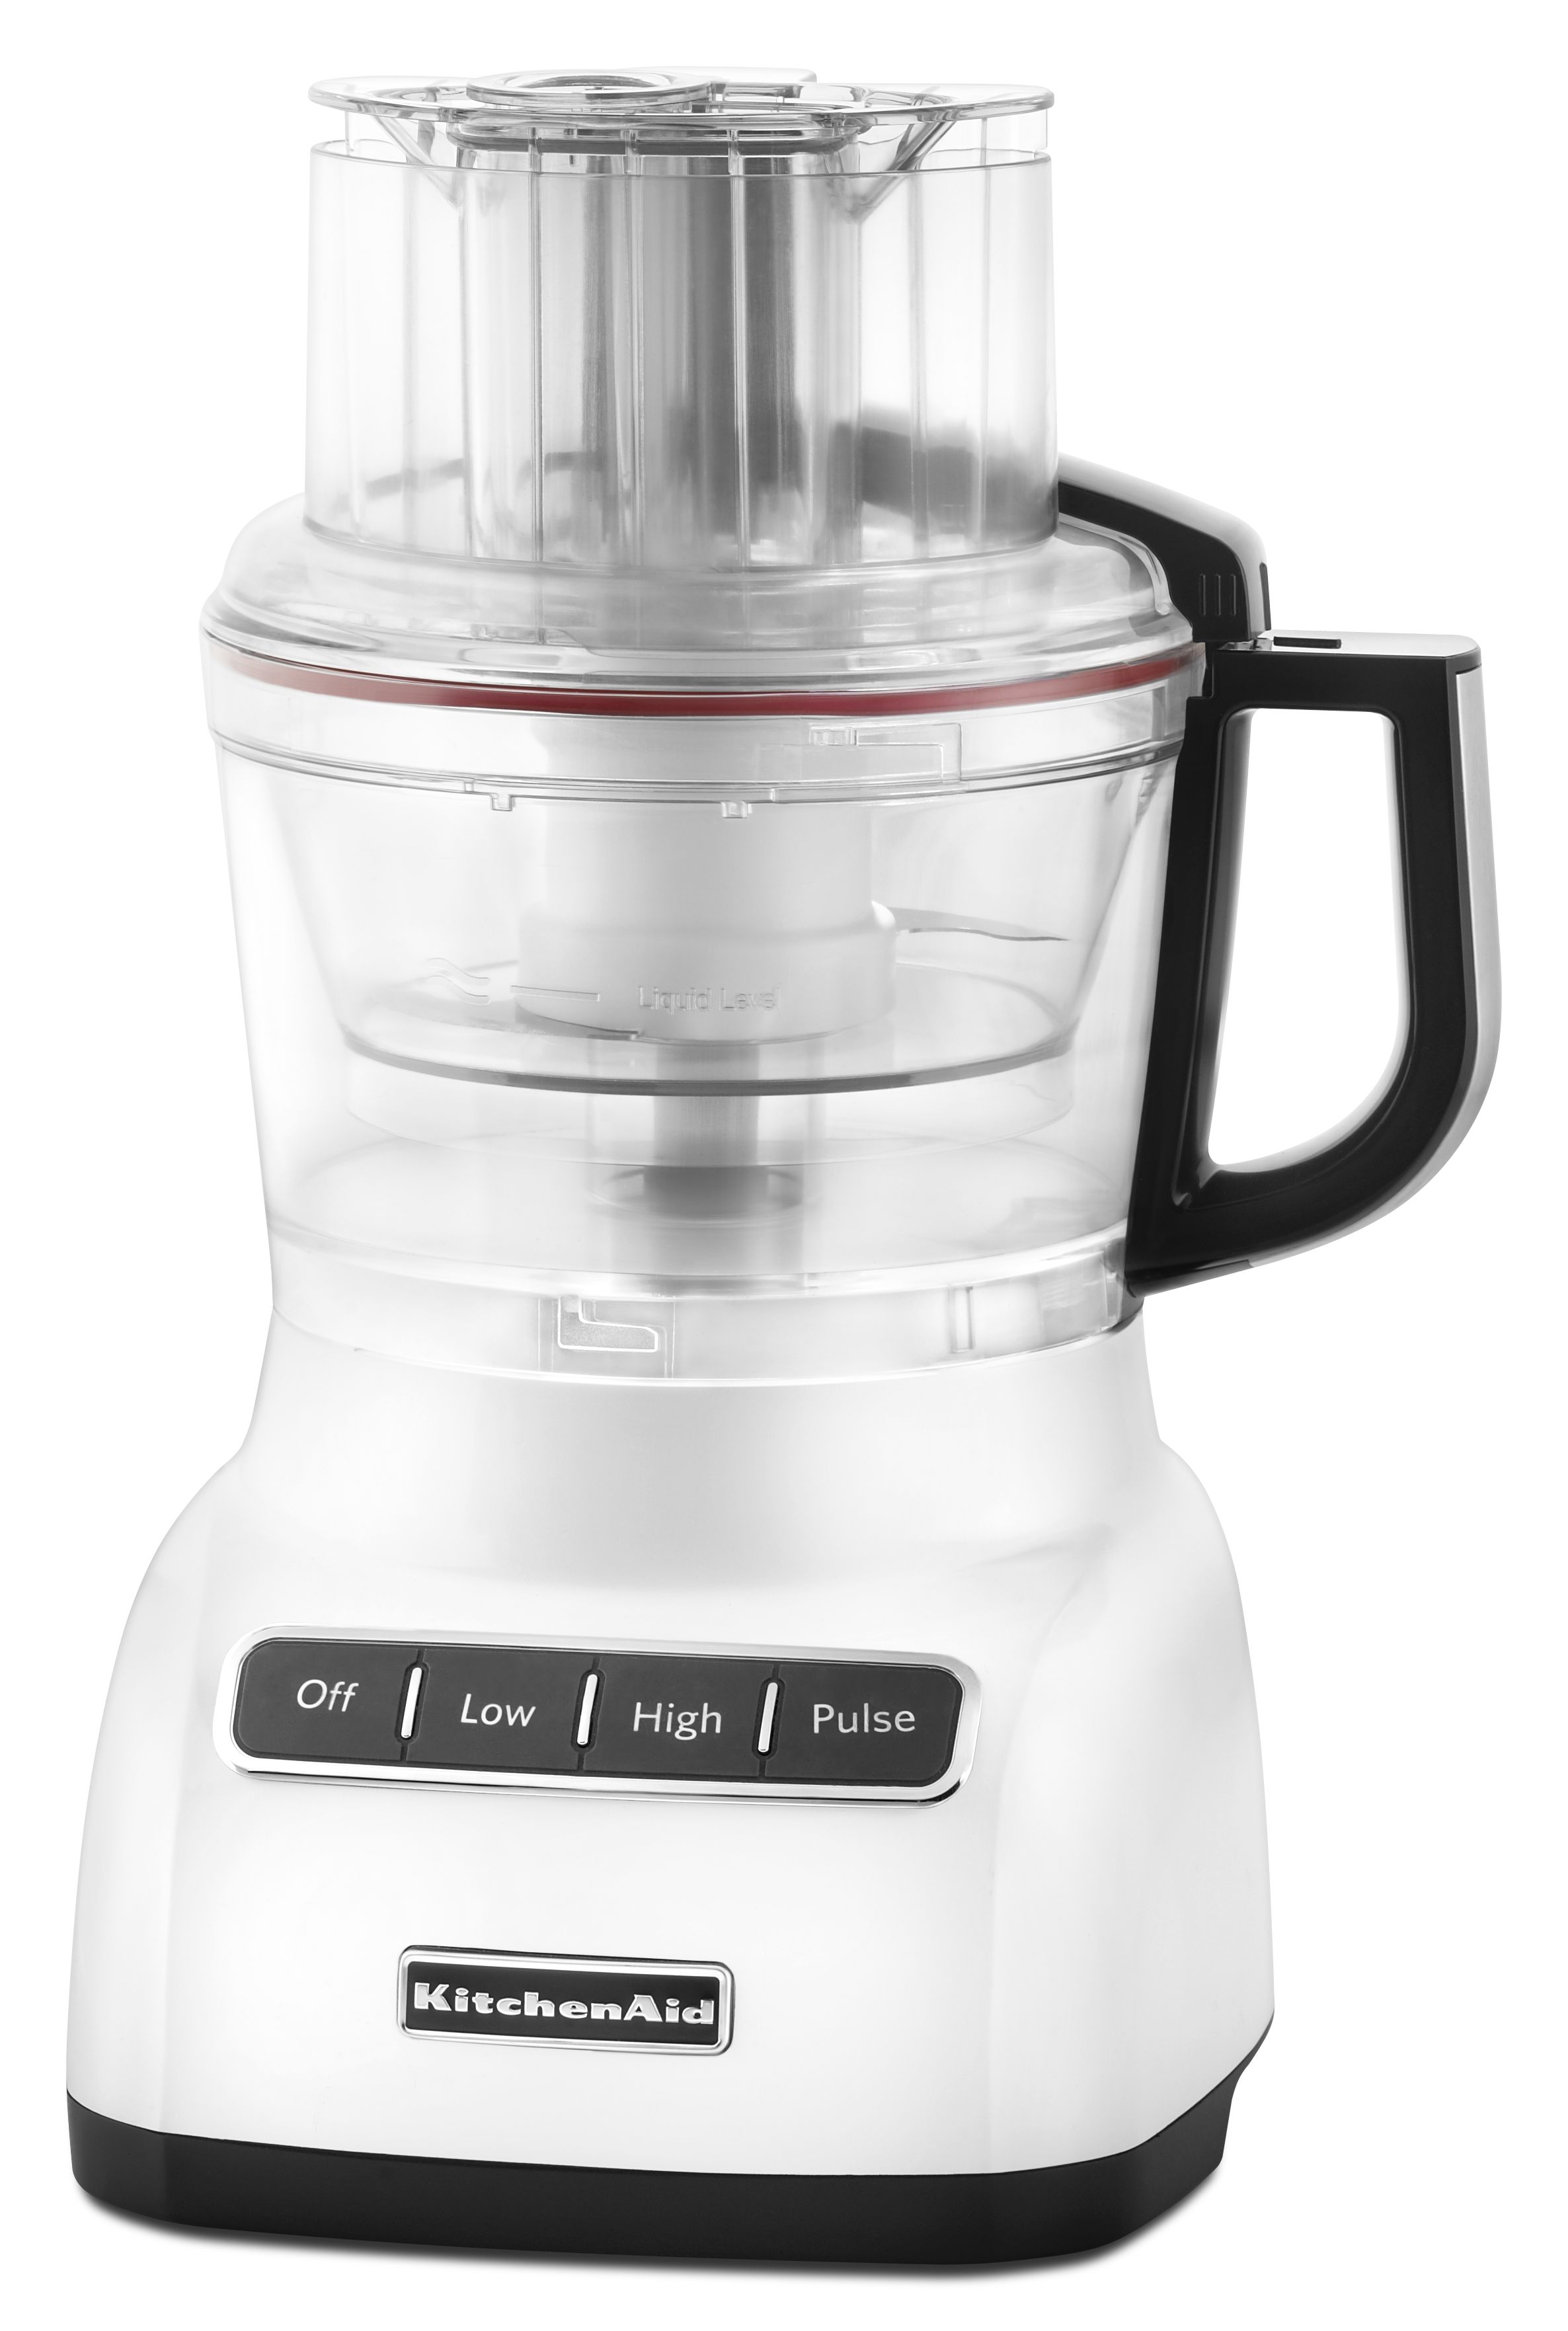 KitchenAid KFP0922WH 9 Cup Food Processor w/ ExactSlice System - White